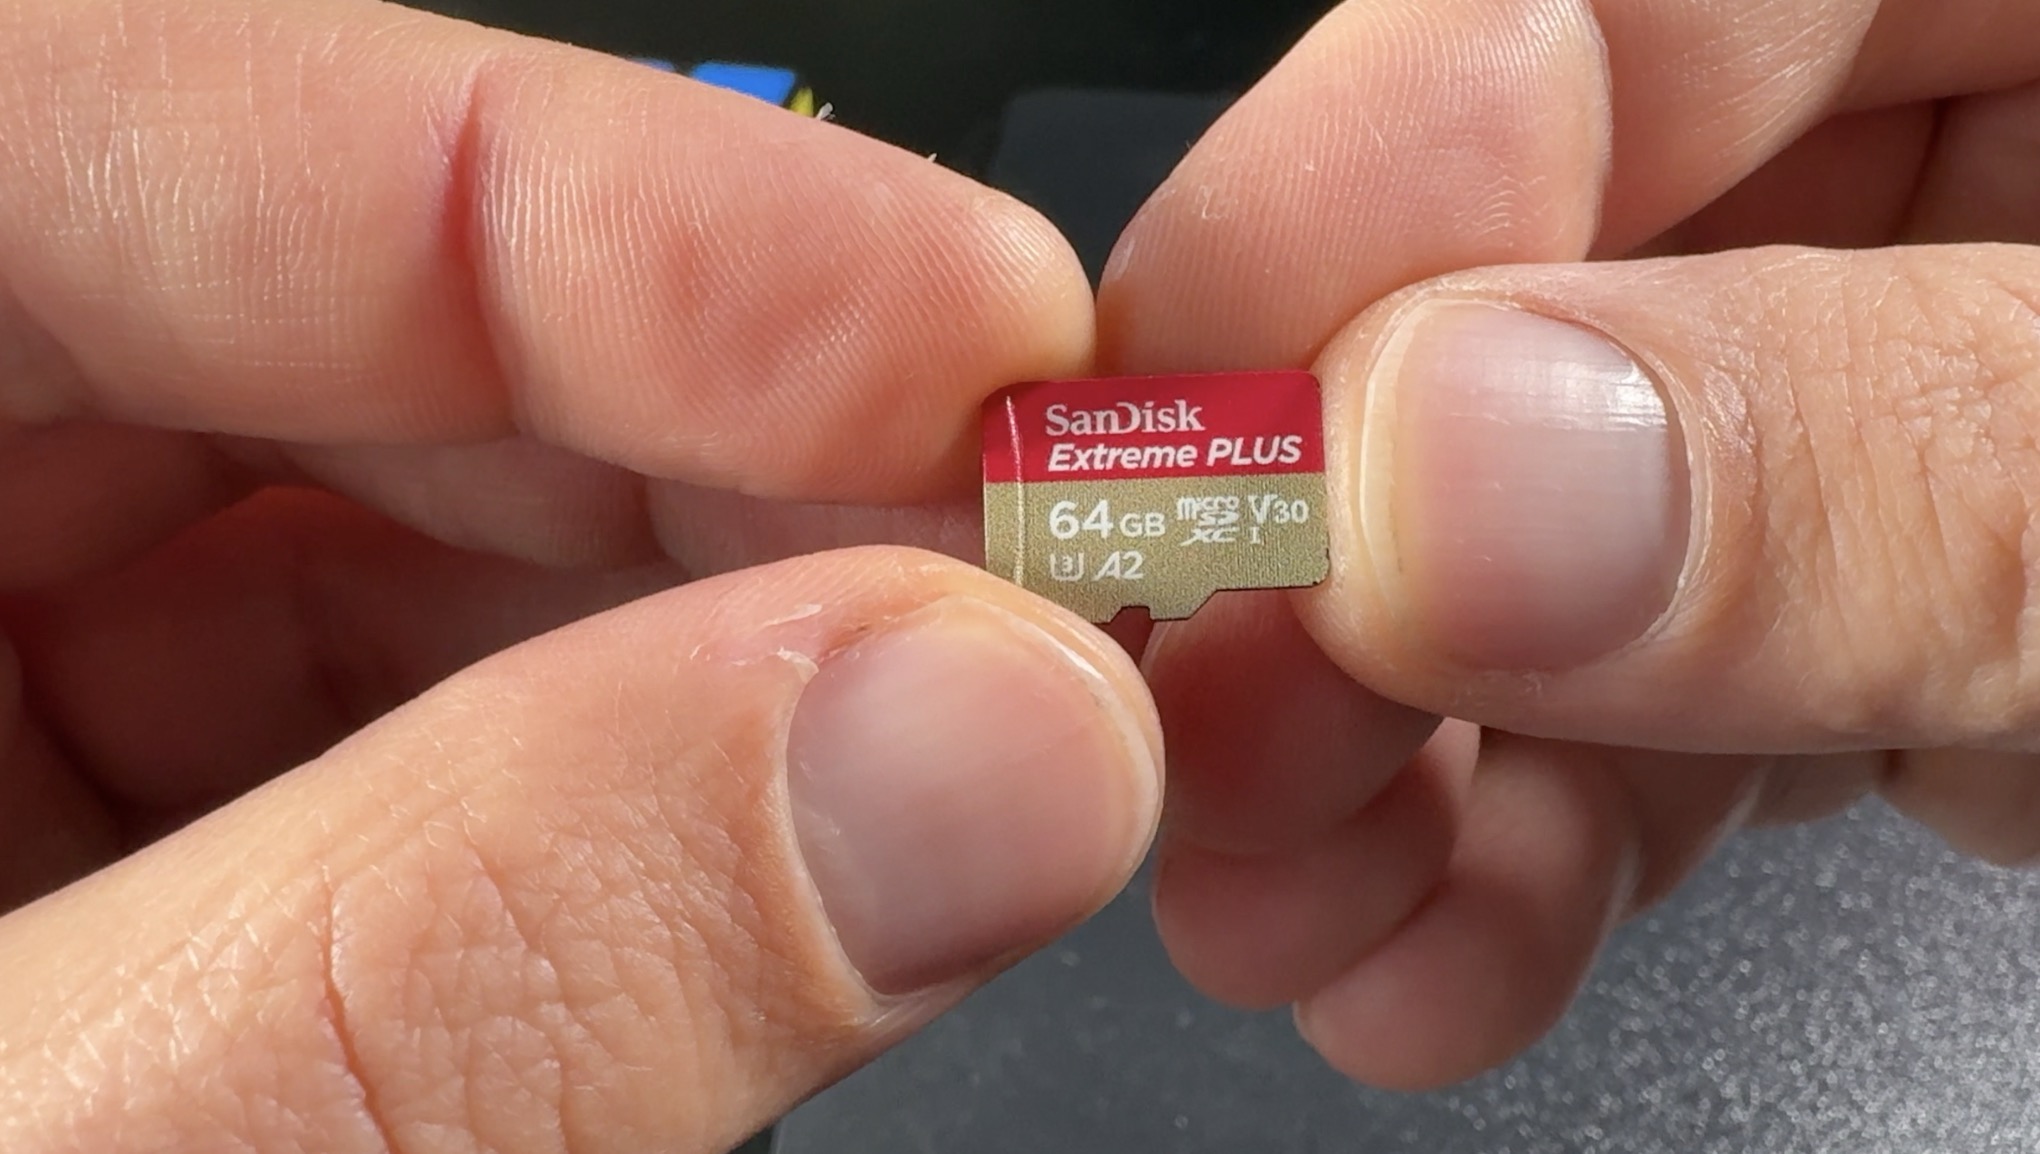 SanDisk extreme Plus SD card is decent enough for the speed tests